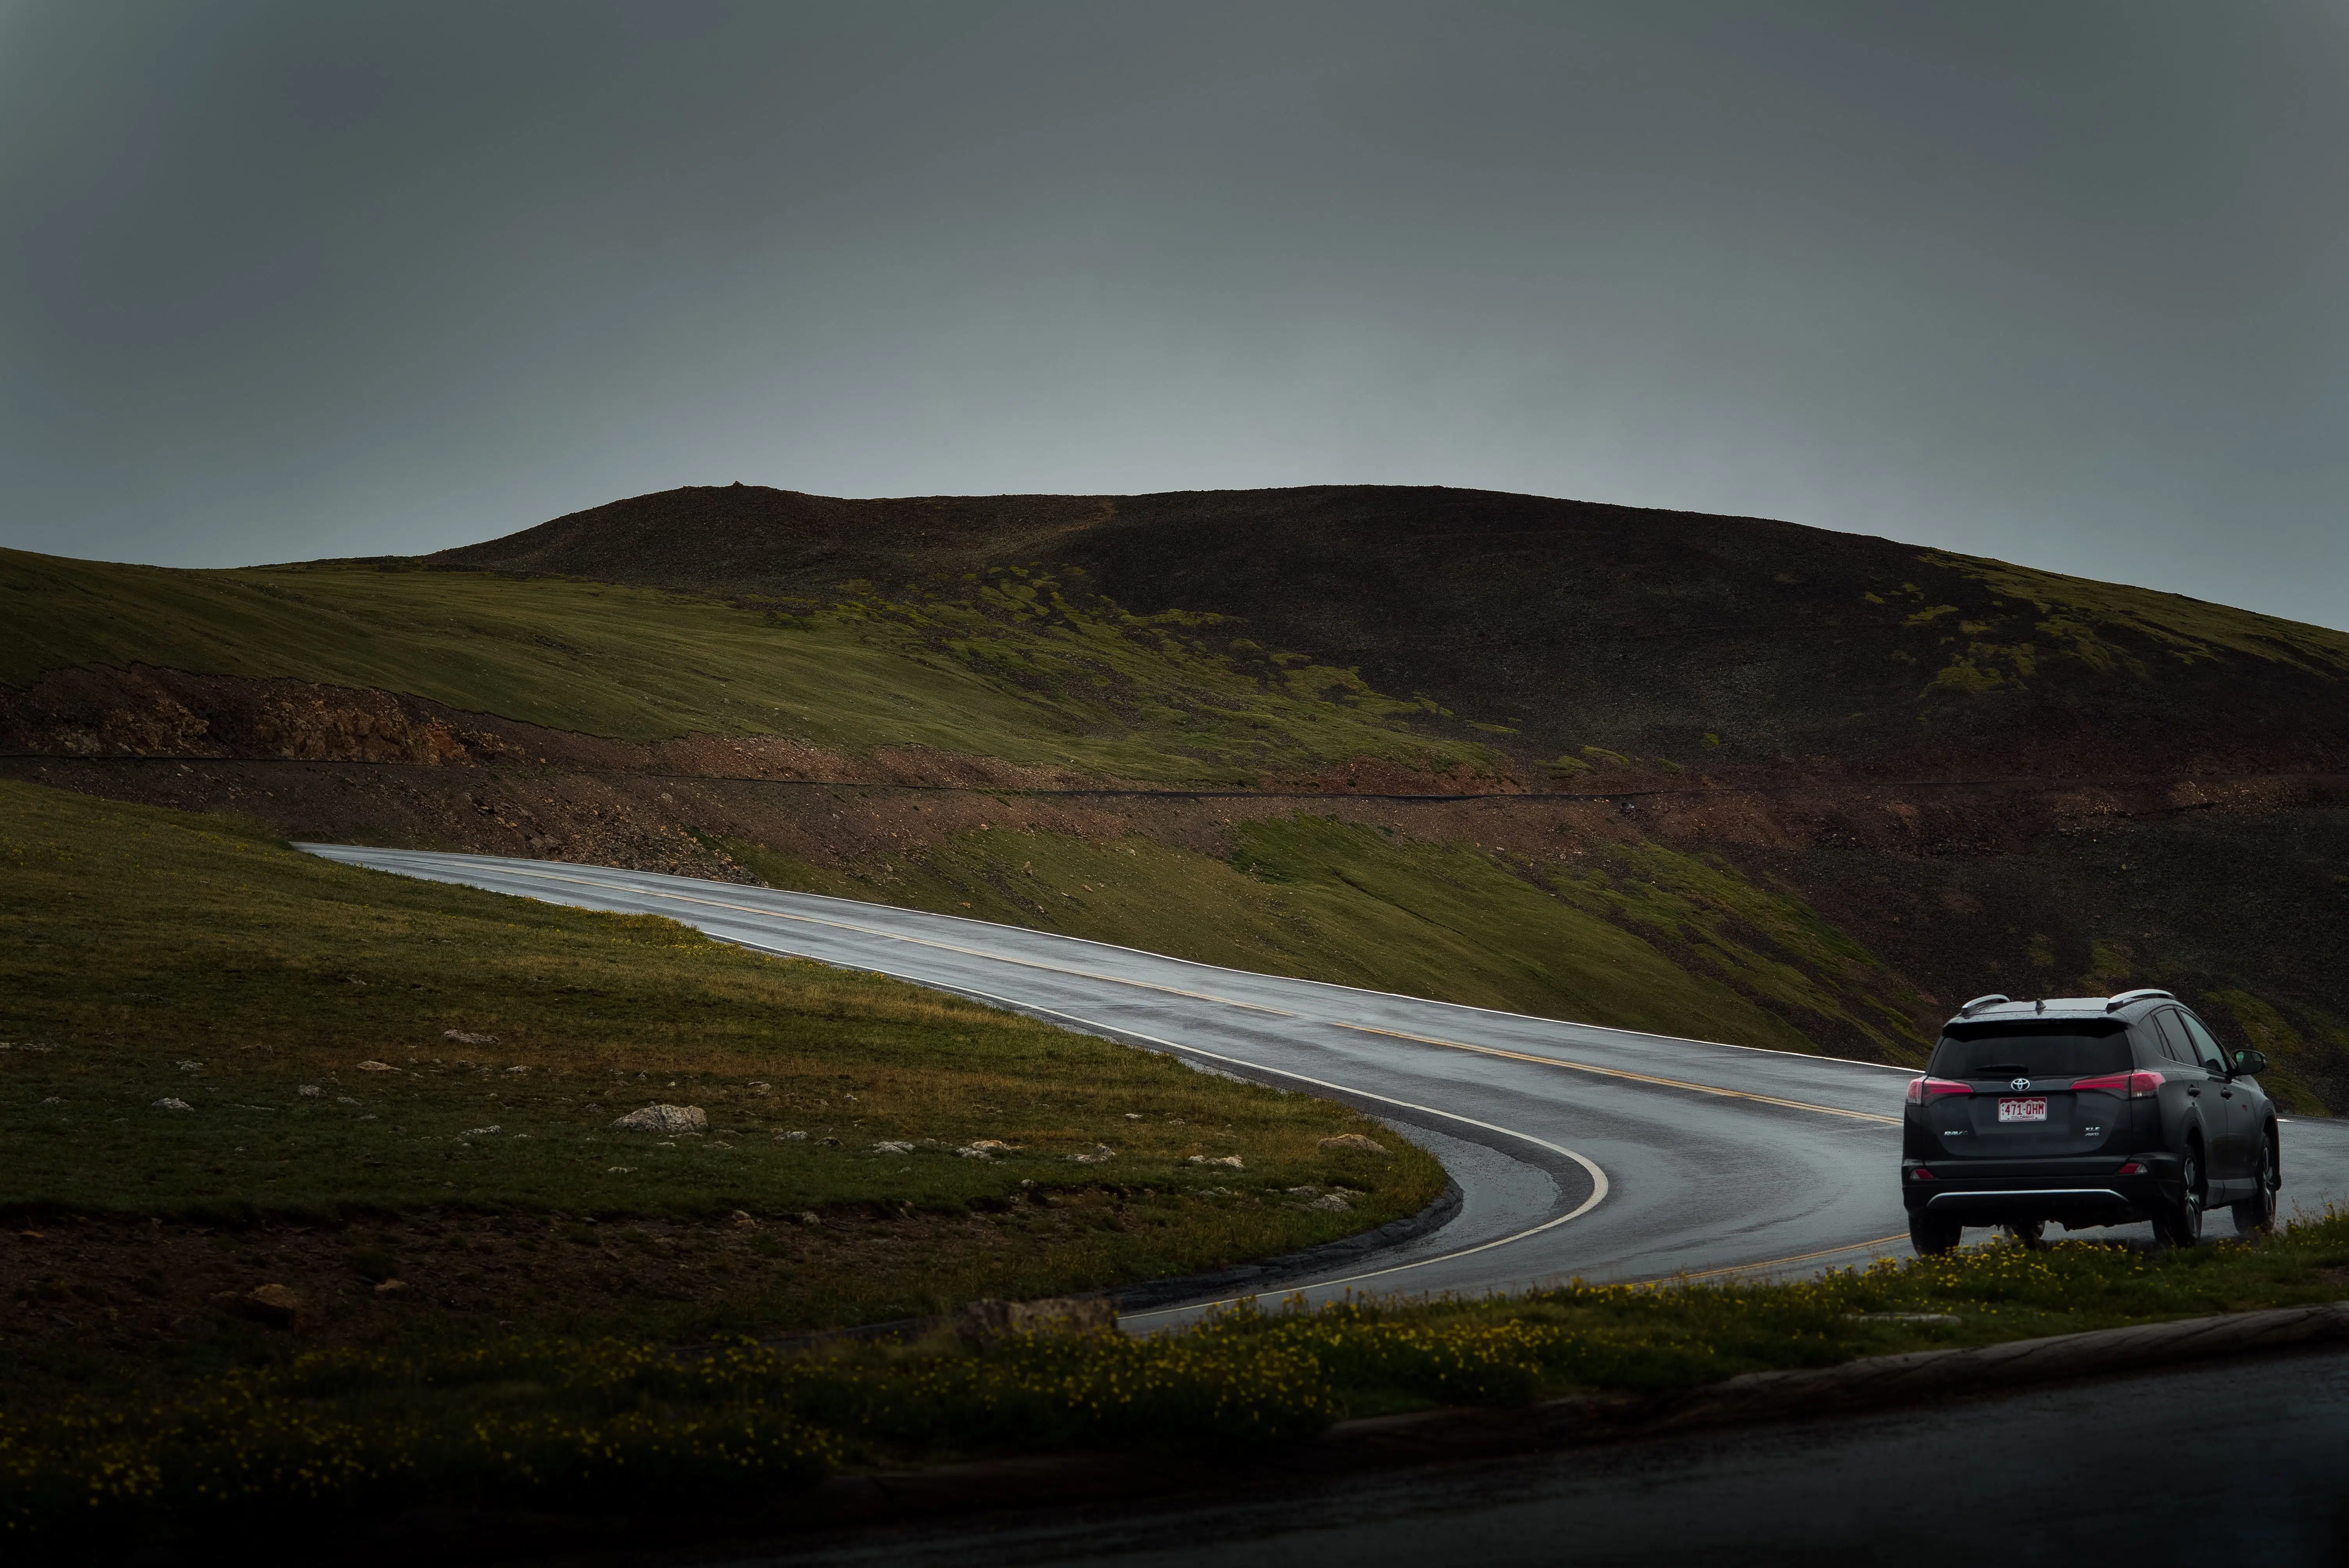 Moody image of car driving down a road